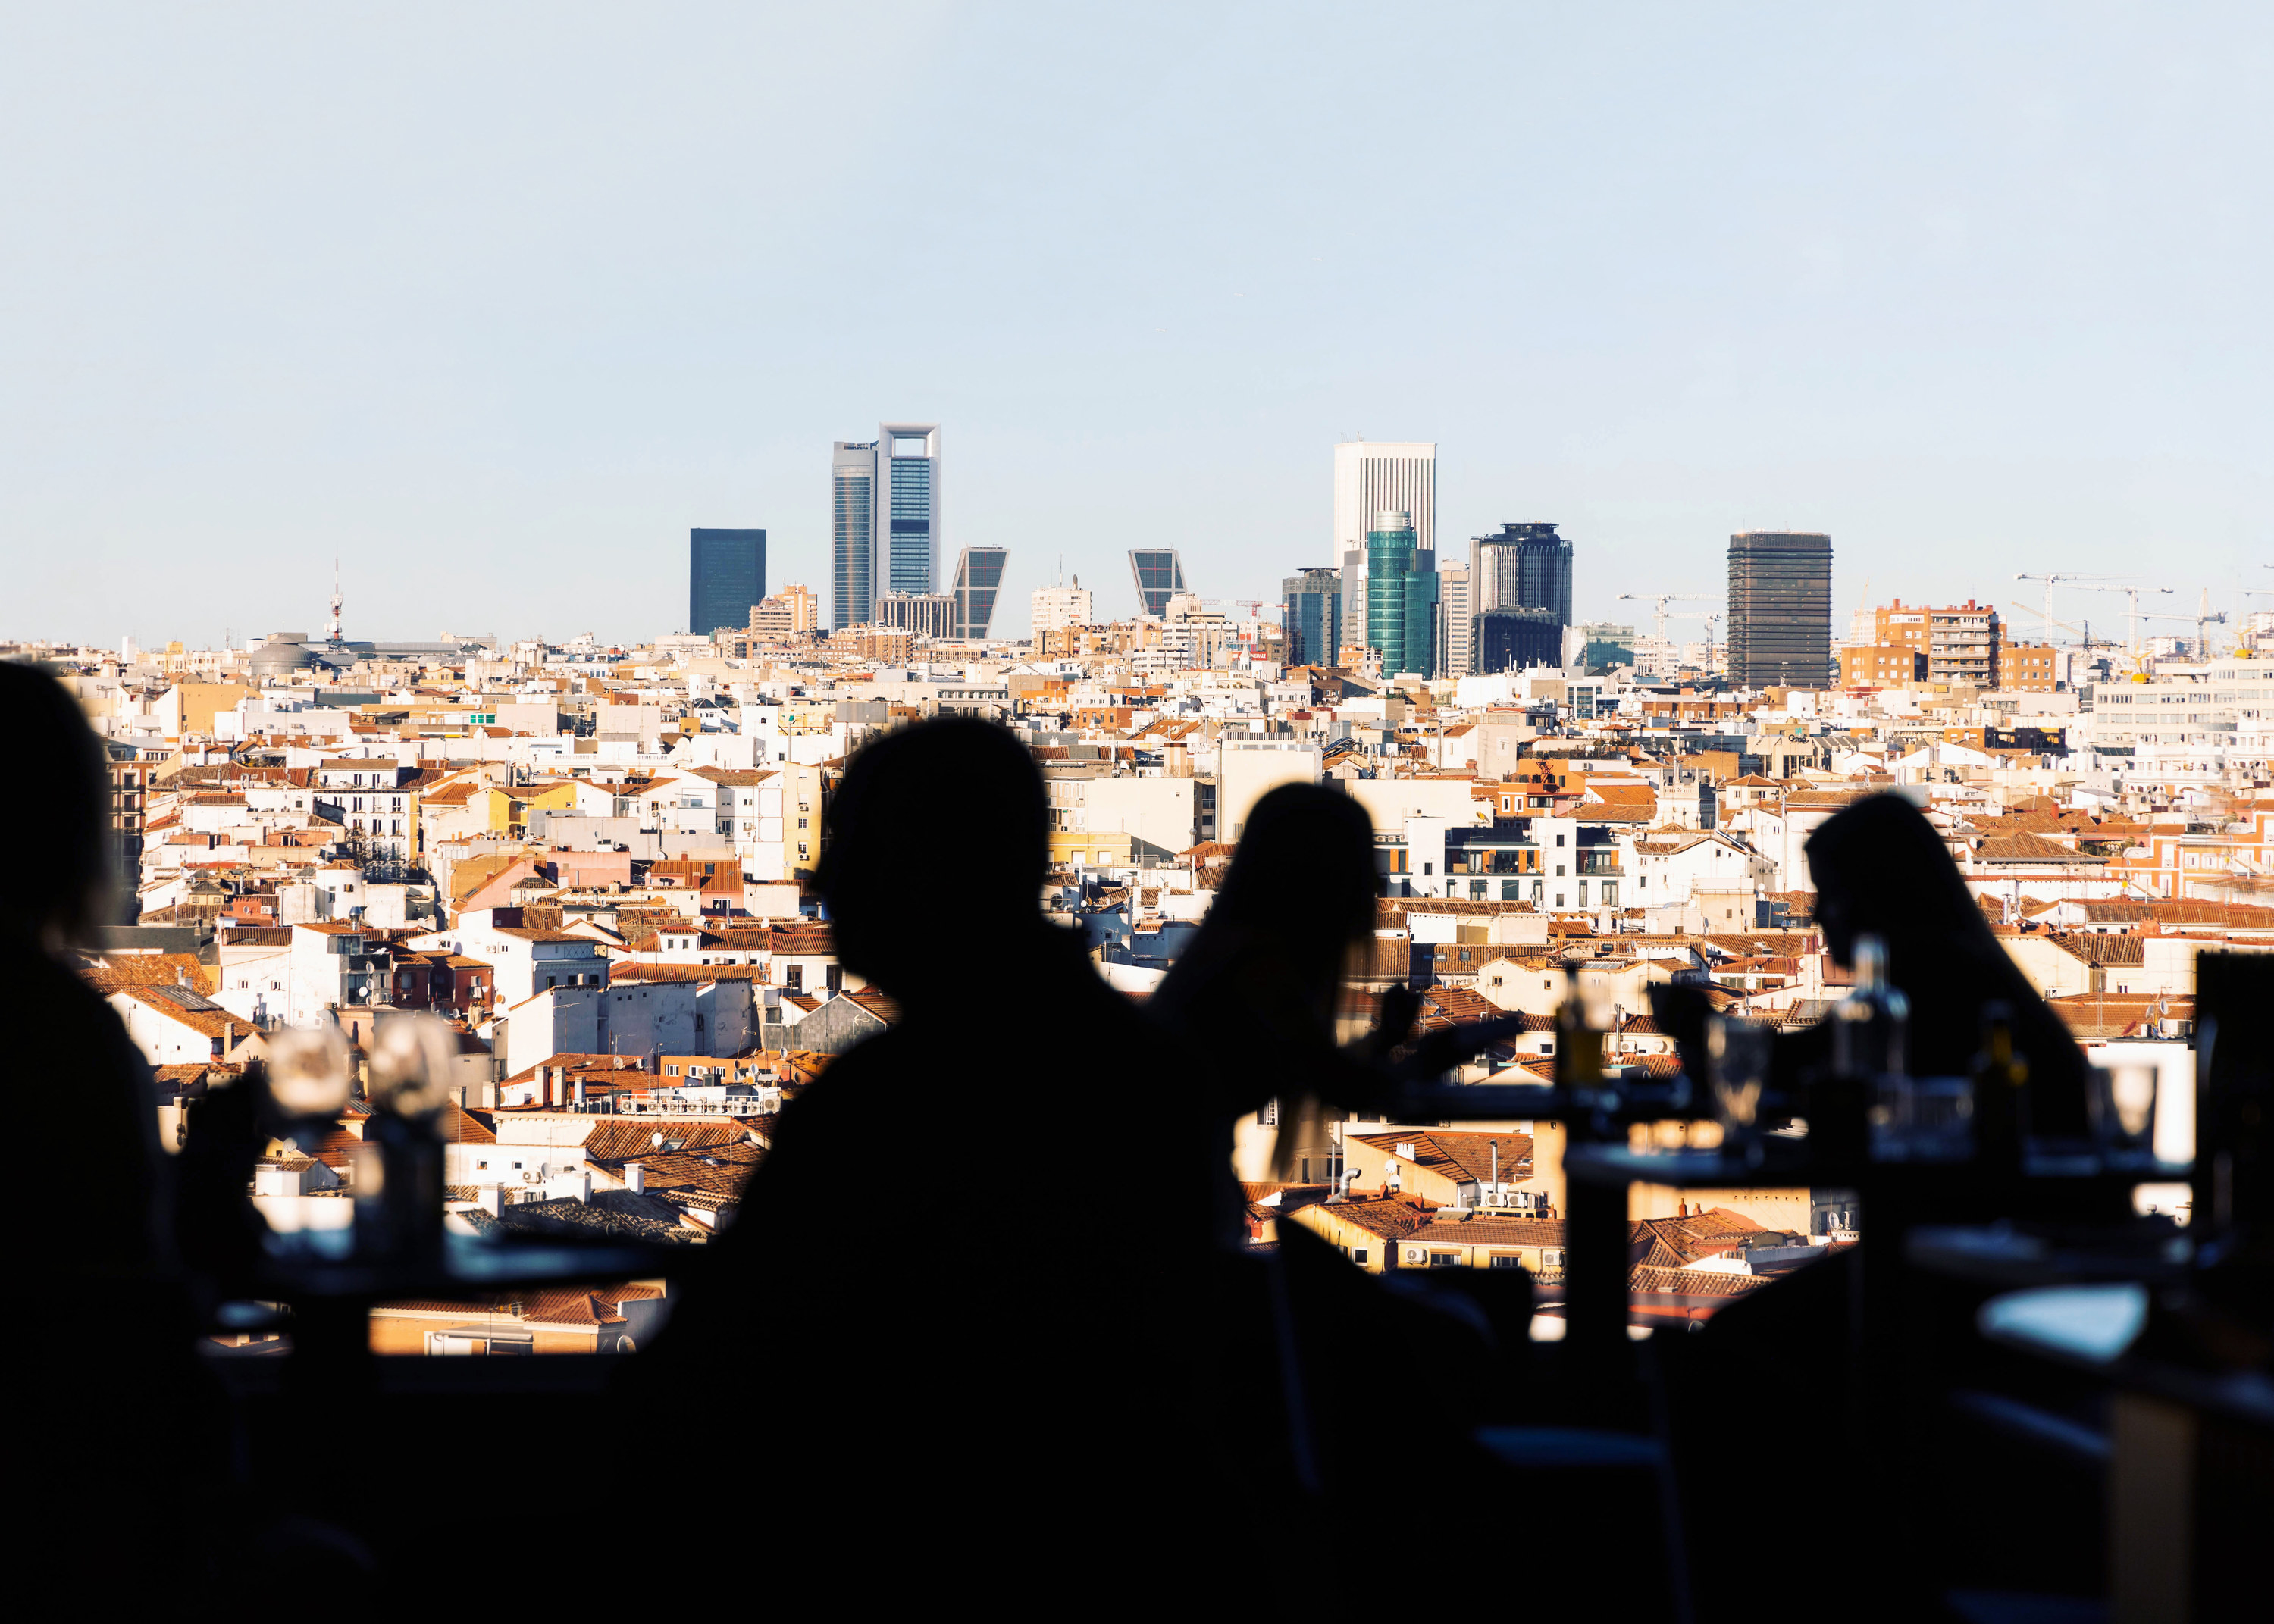 Social gathering in Madrid center with the views of the business district of Madrid, Spain